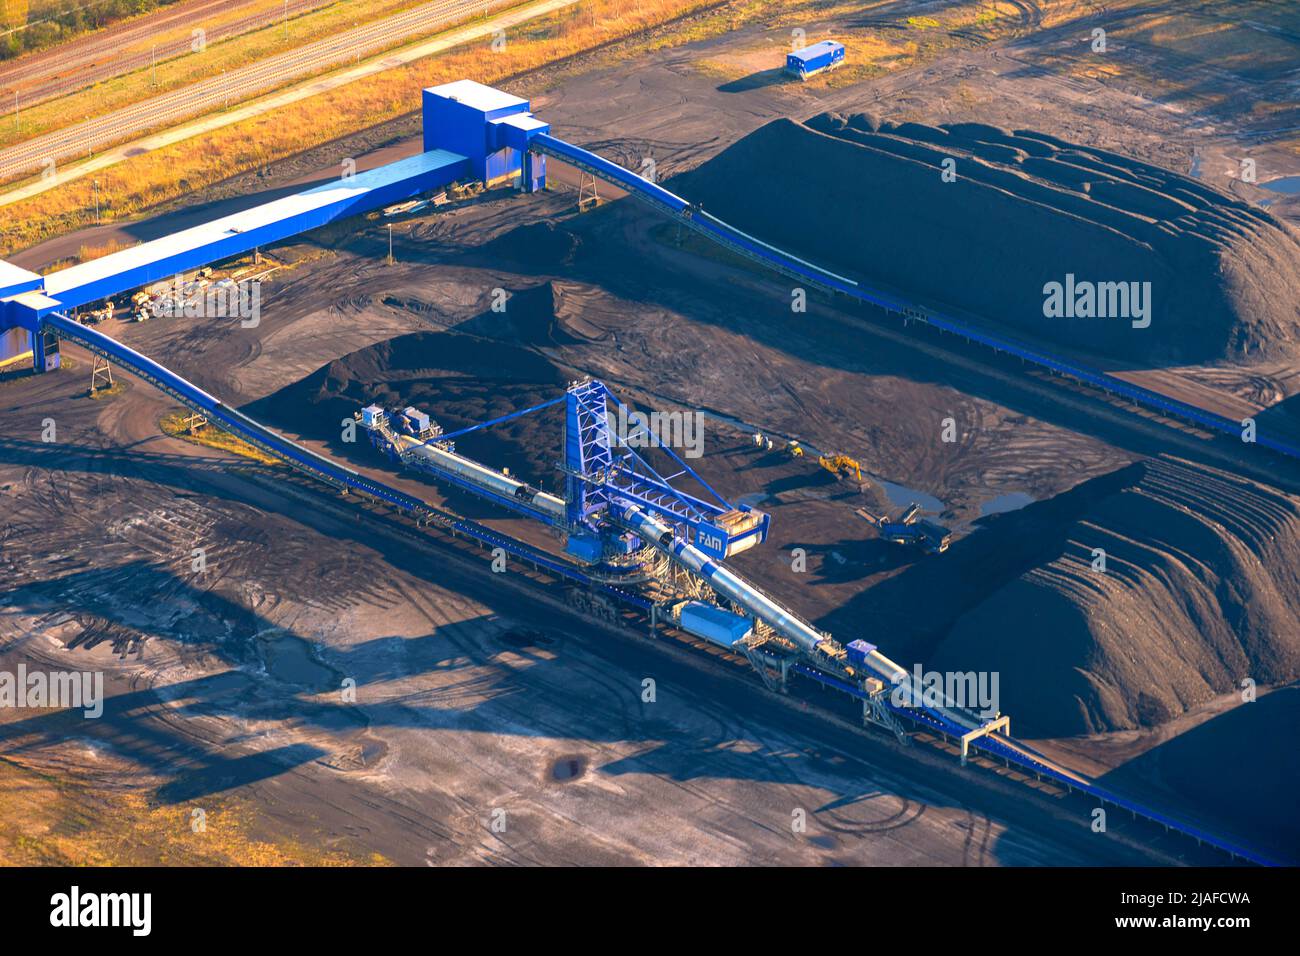 Uniper coal-fired power station Wilhelmshaven, removal, 04/18/2022, aerial view, Germany, Lower Saxony Stock Photo